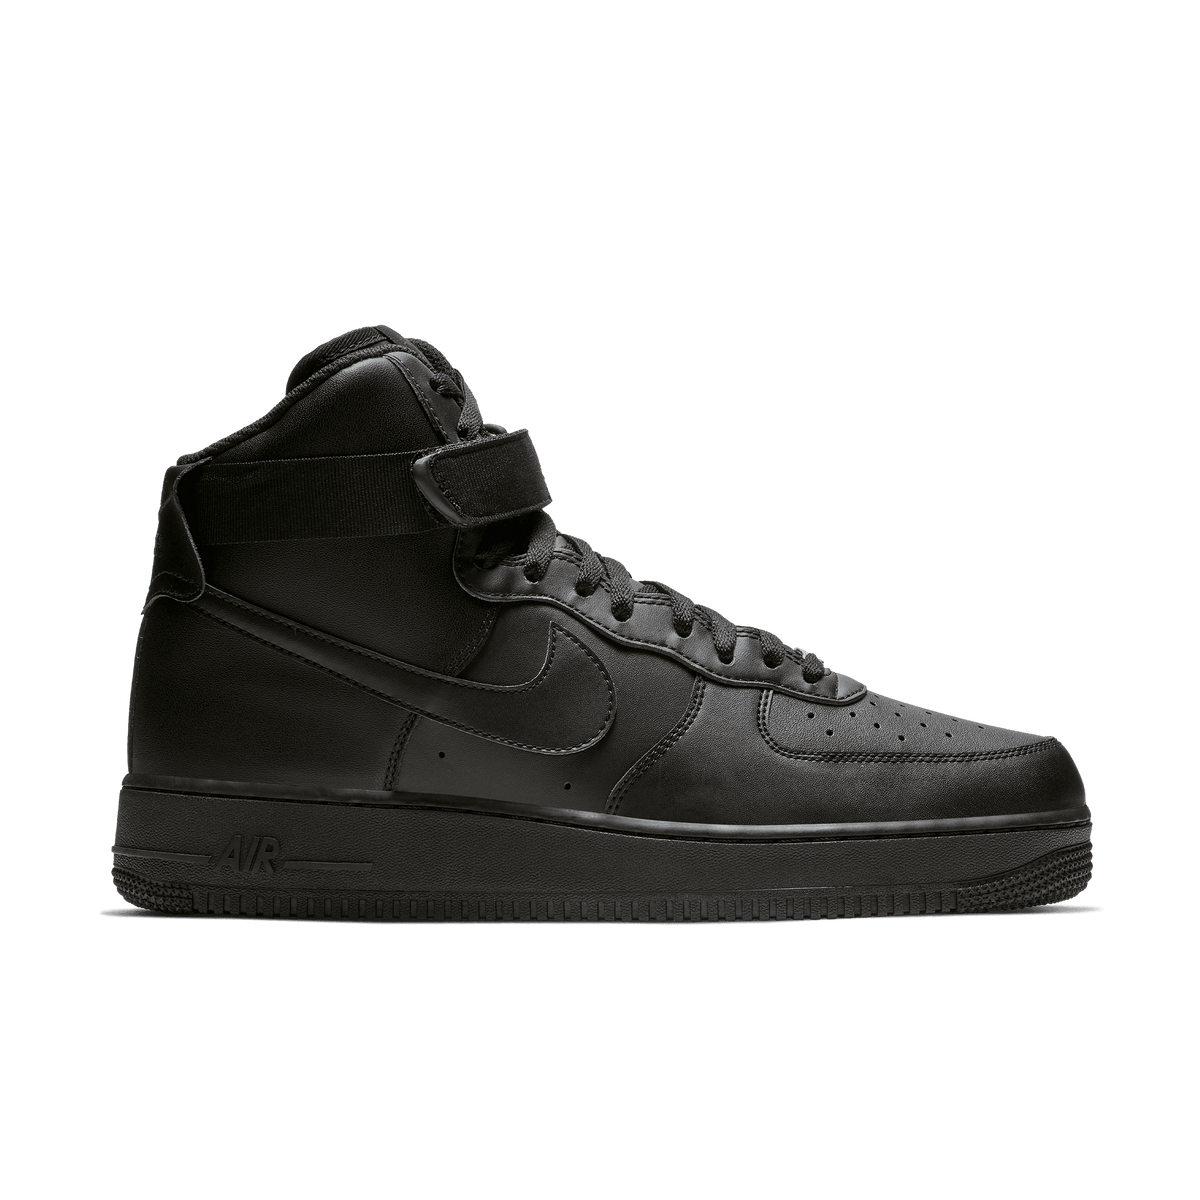 Jimmy Jazz - ‪The Nike Air Force 1 High '07 LV8 is ready